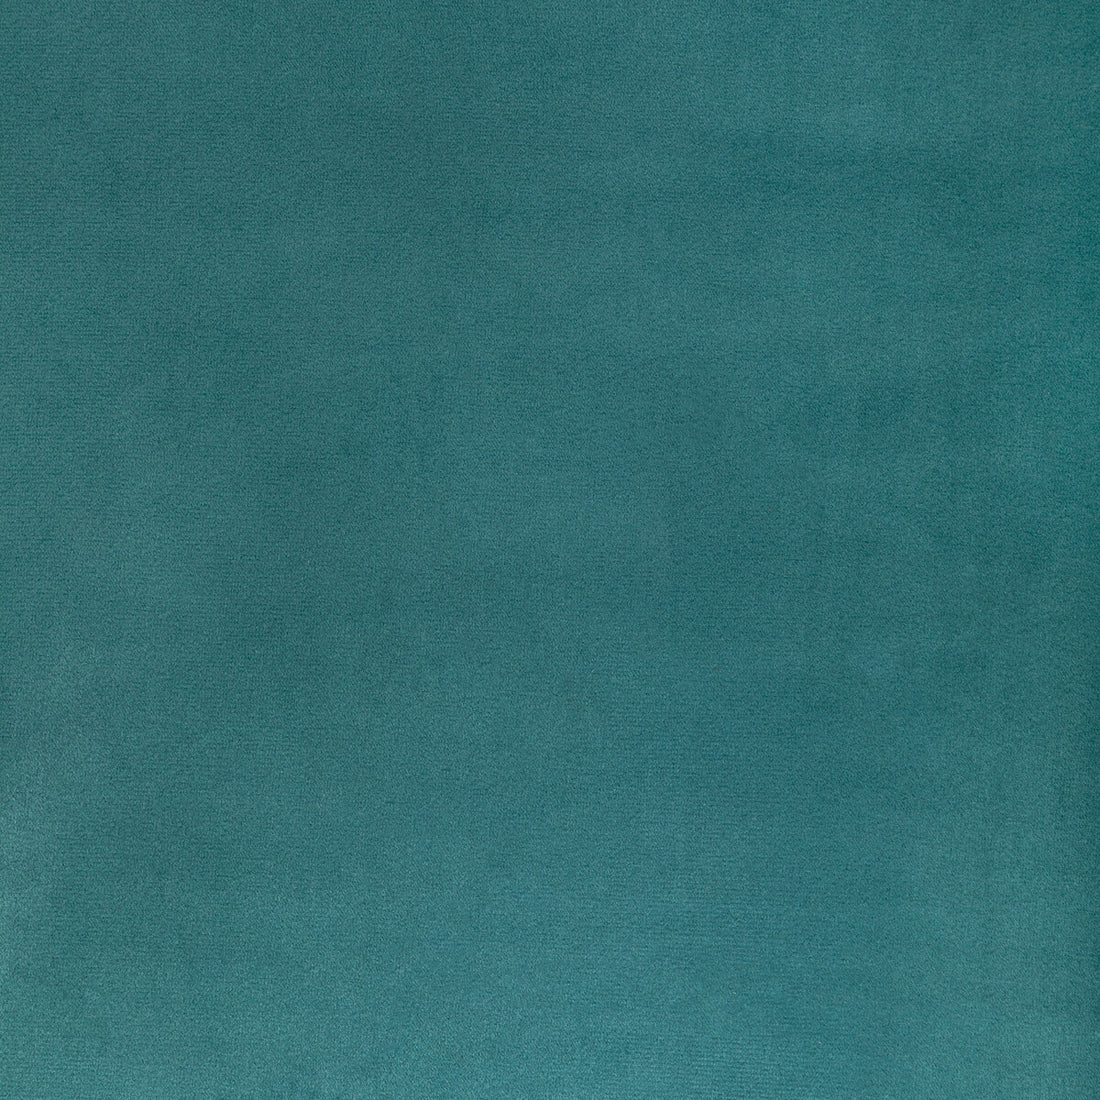 Rocco Velvet fabric in lagoon color - pattern 36652.35.0 - by Kravet Contract